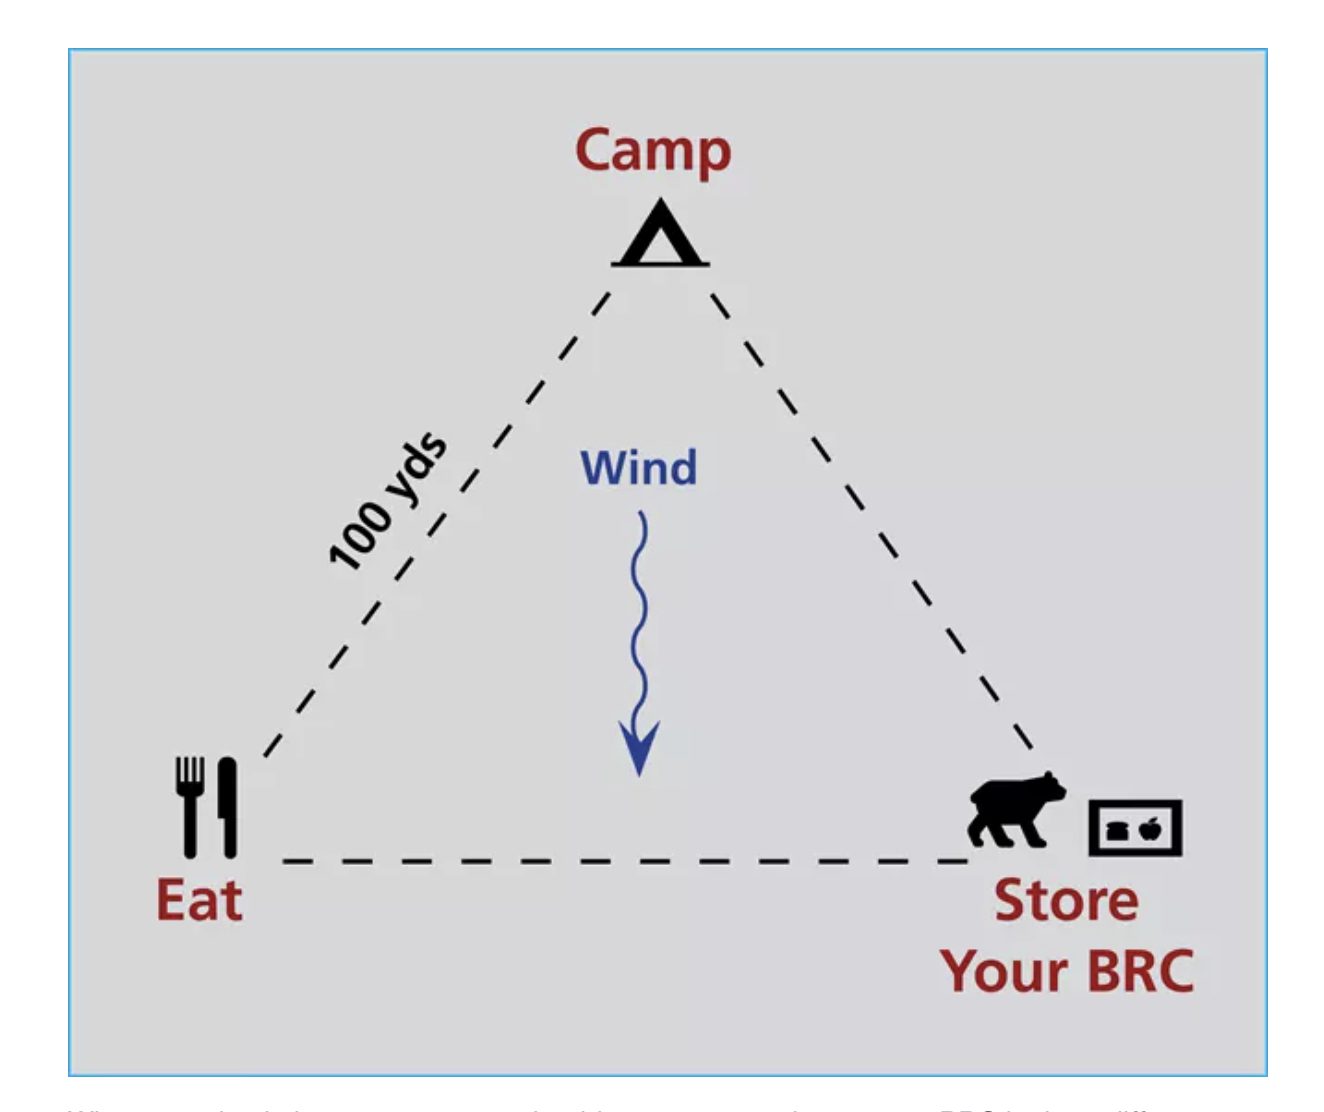 The camping in bear country triangle method.